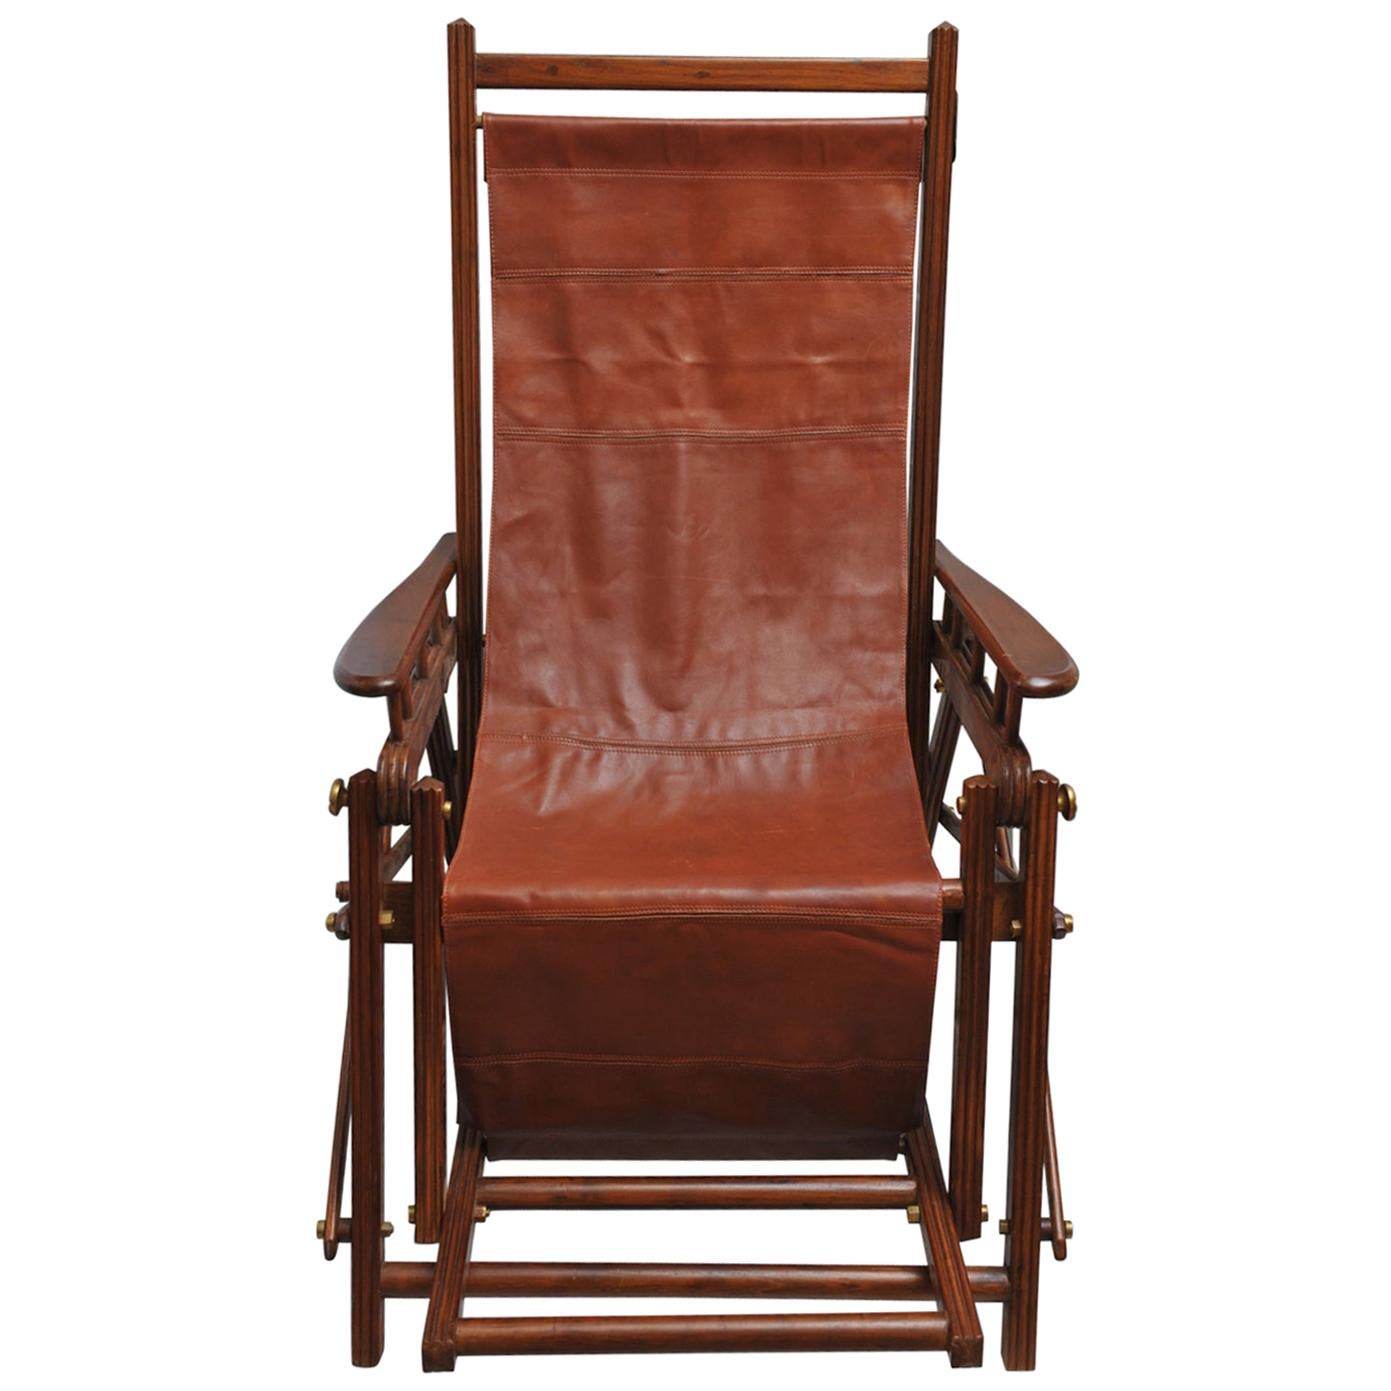 British Campaign Folding Teak and Leather Safari Chair and Recliner, Early 1900s